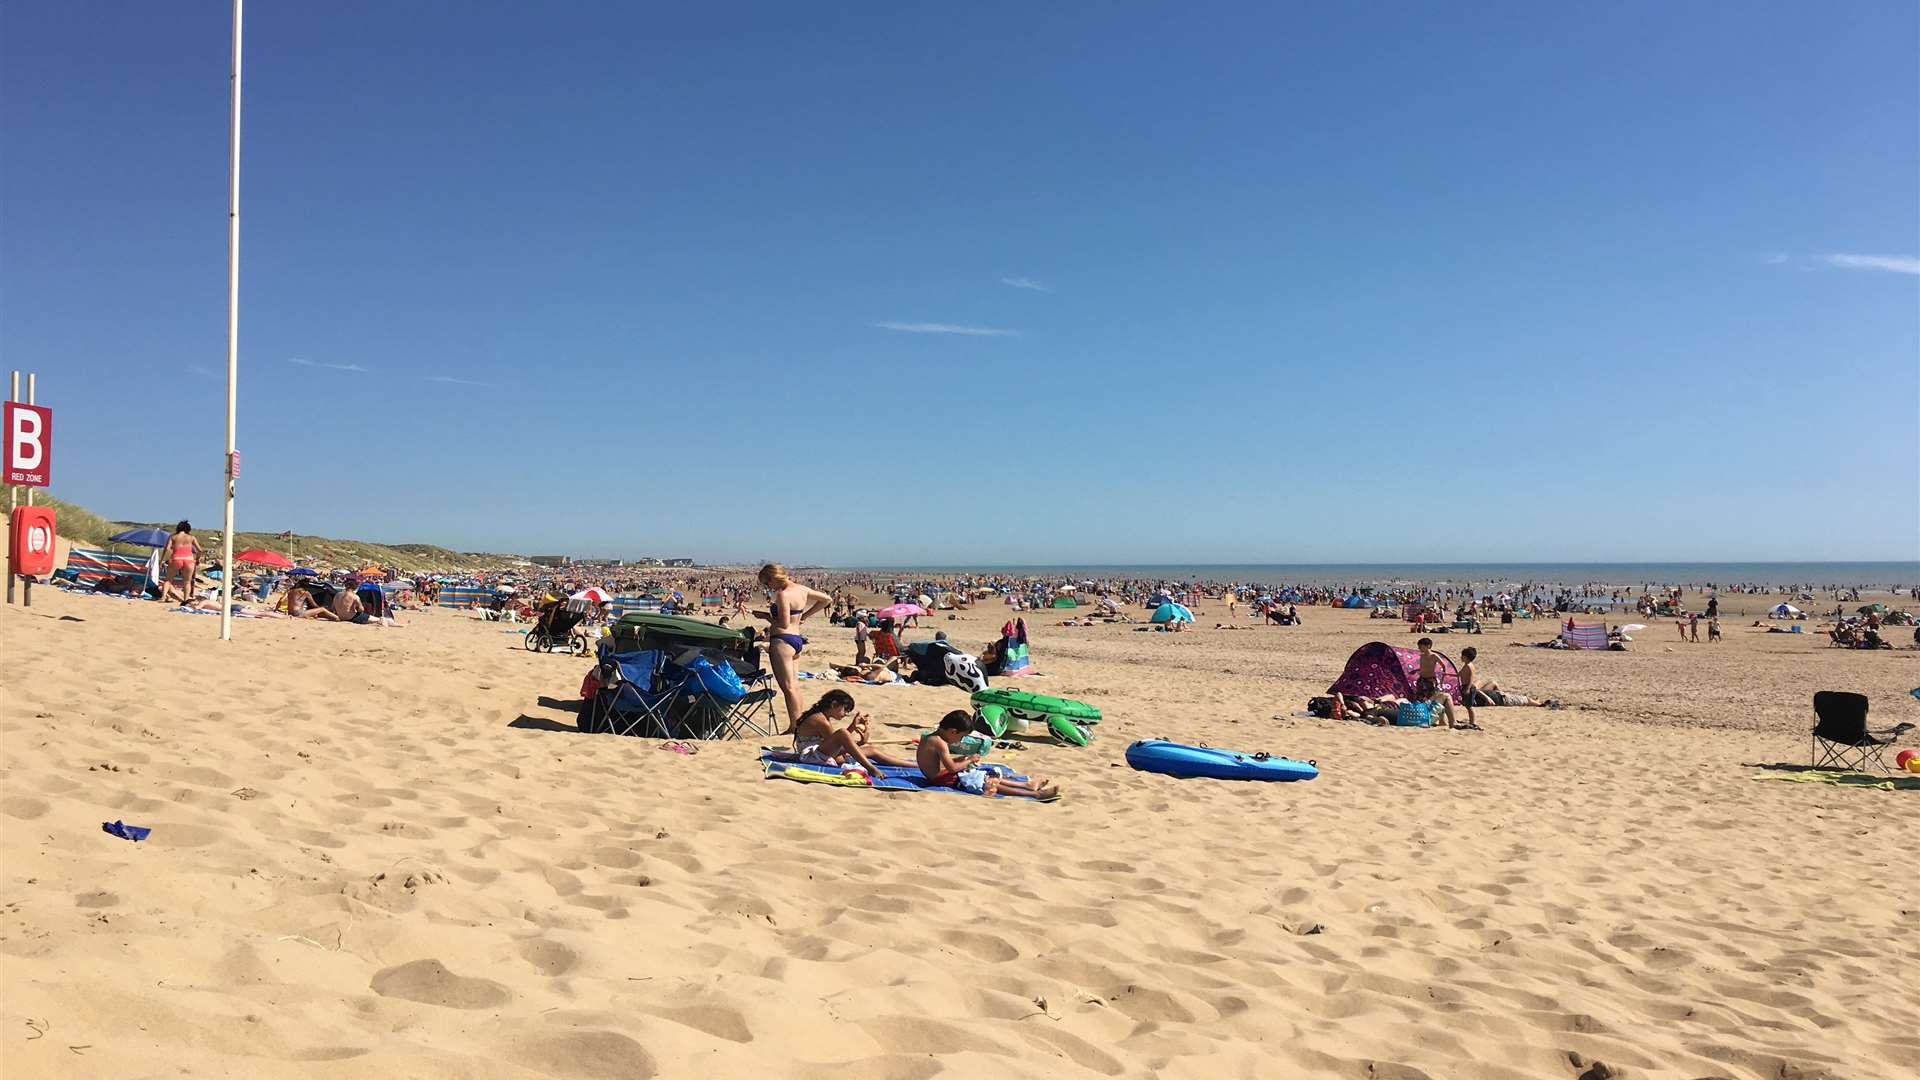 General scene of Camber Sands, a popular holiday location